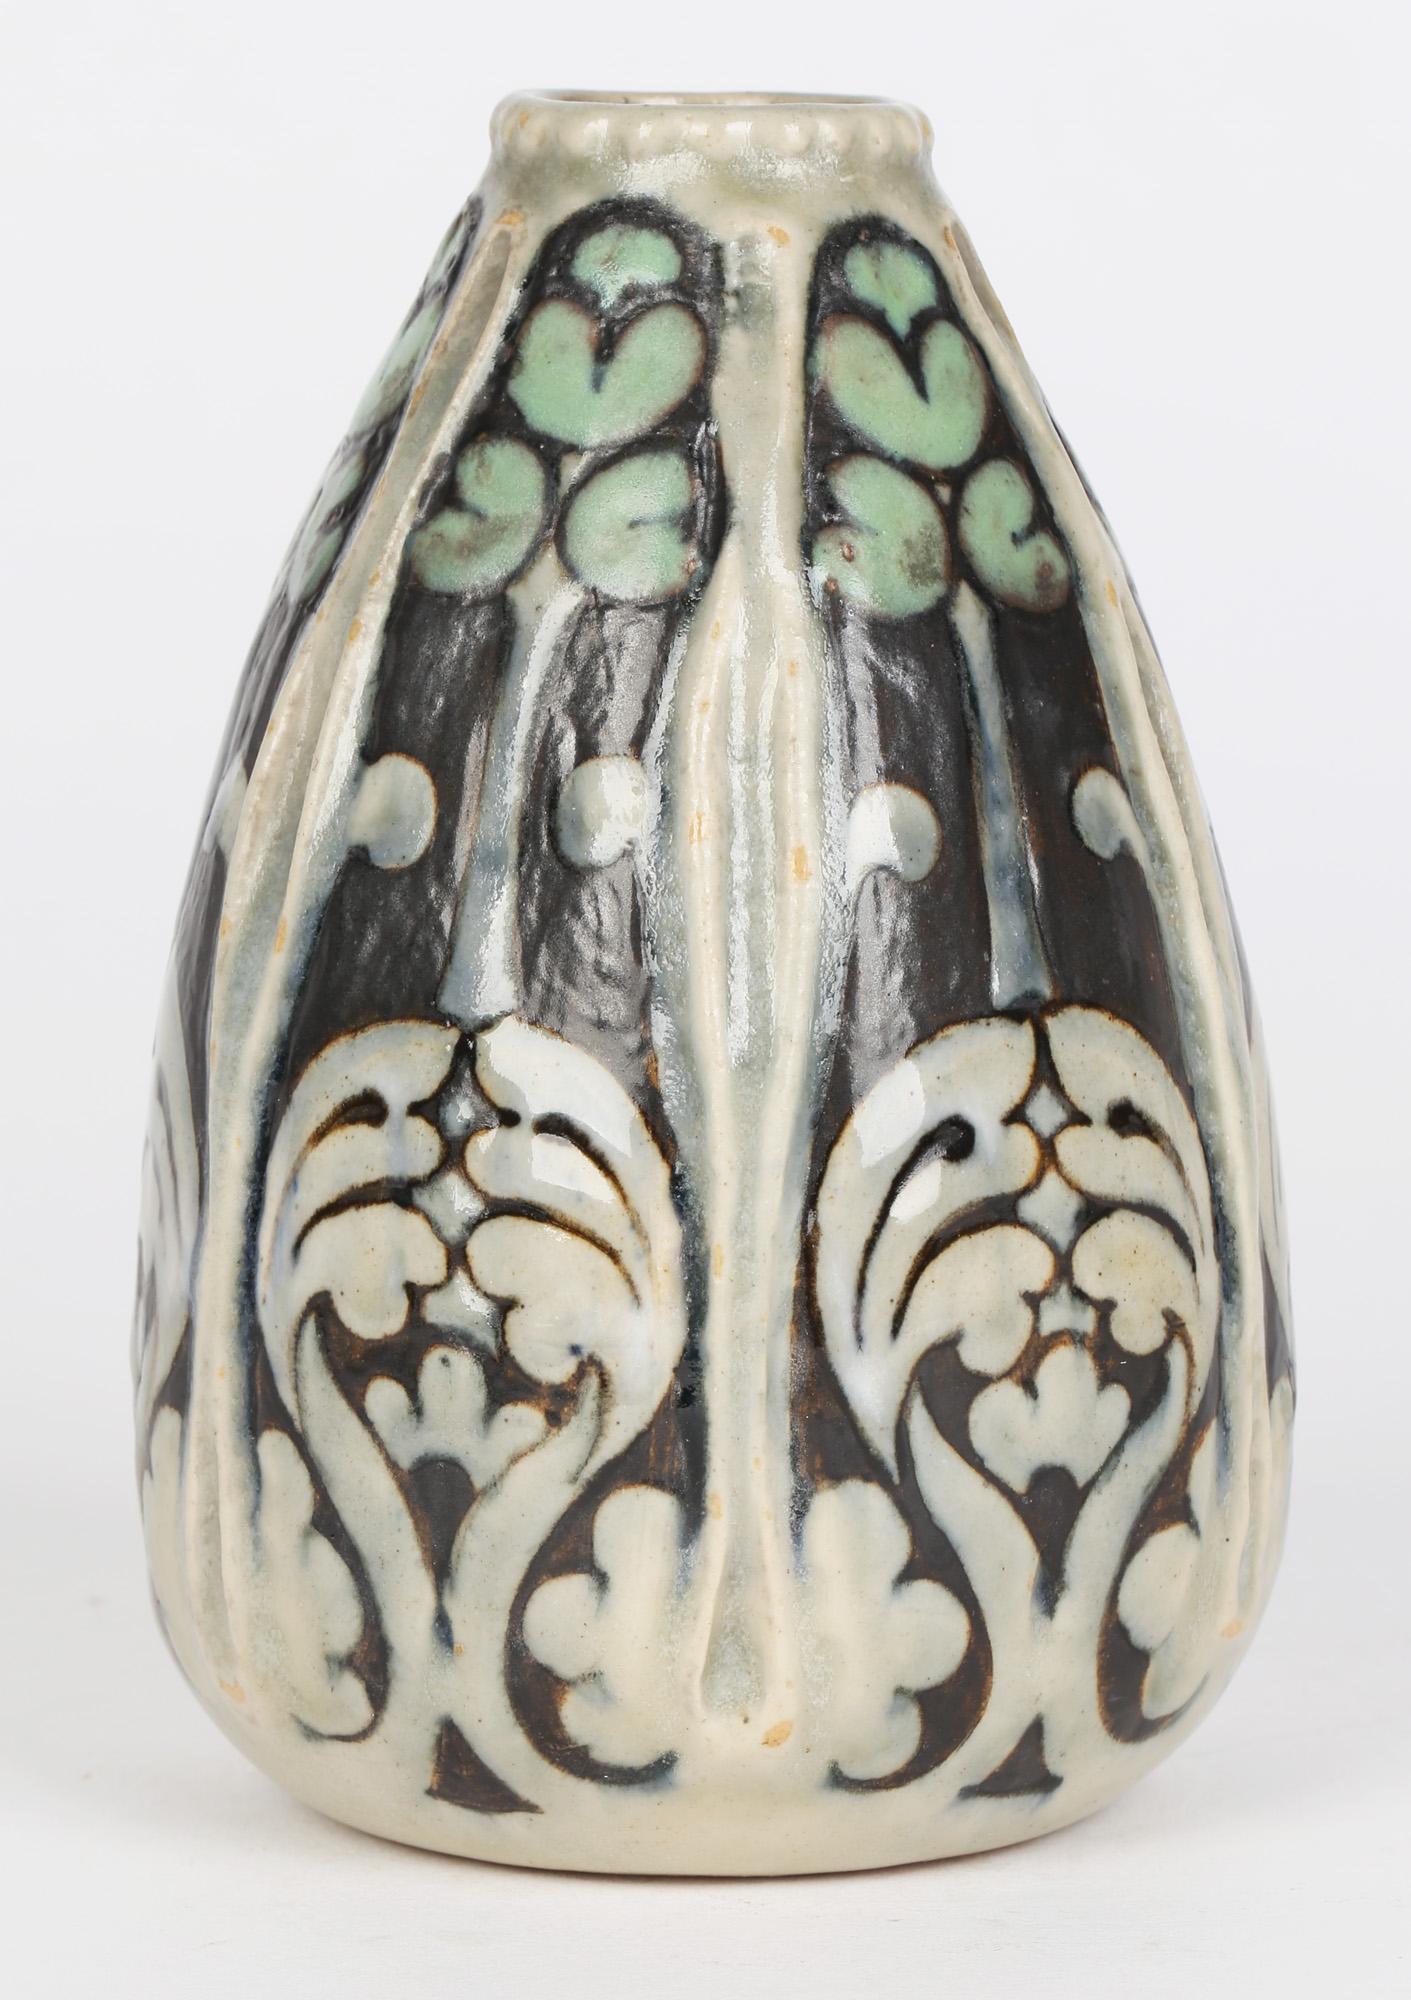 A stylish Doulton Lambeth art nouveau art pottery gourd shaped vase with stylized foliage in the Persian taste by Francis Pope and dating from around 1904. The vase is of rounded shape narrowing to a small rounded opening the body subdivided into